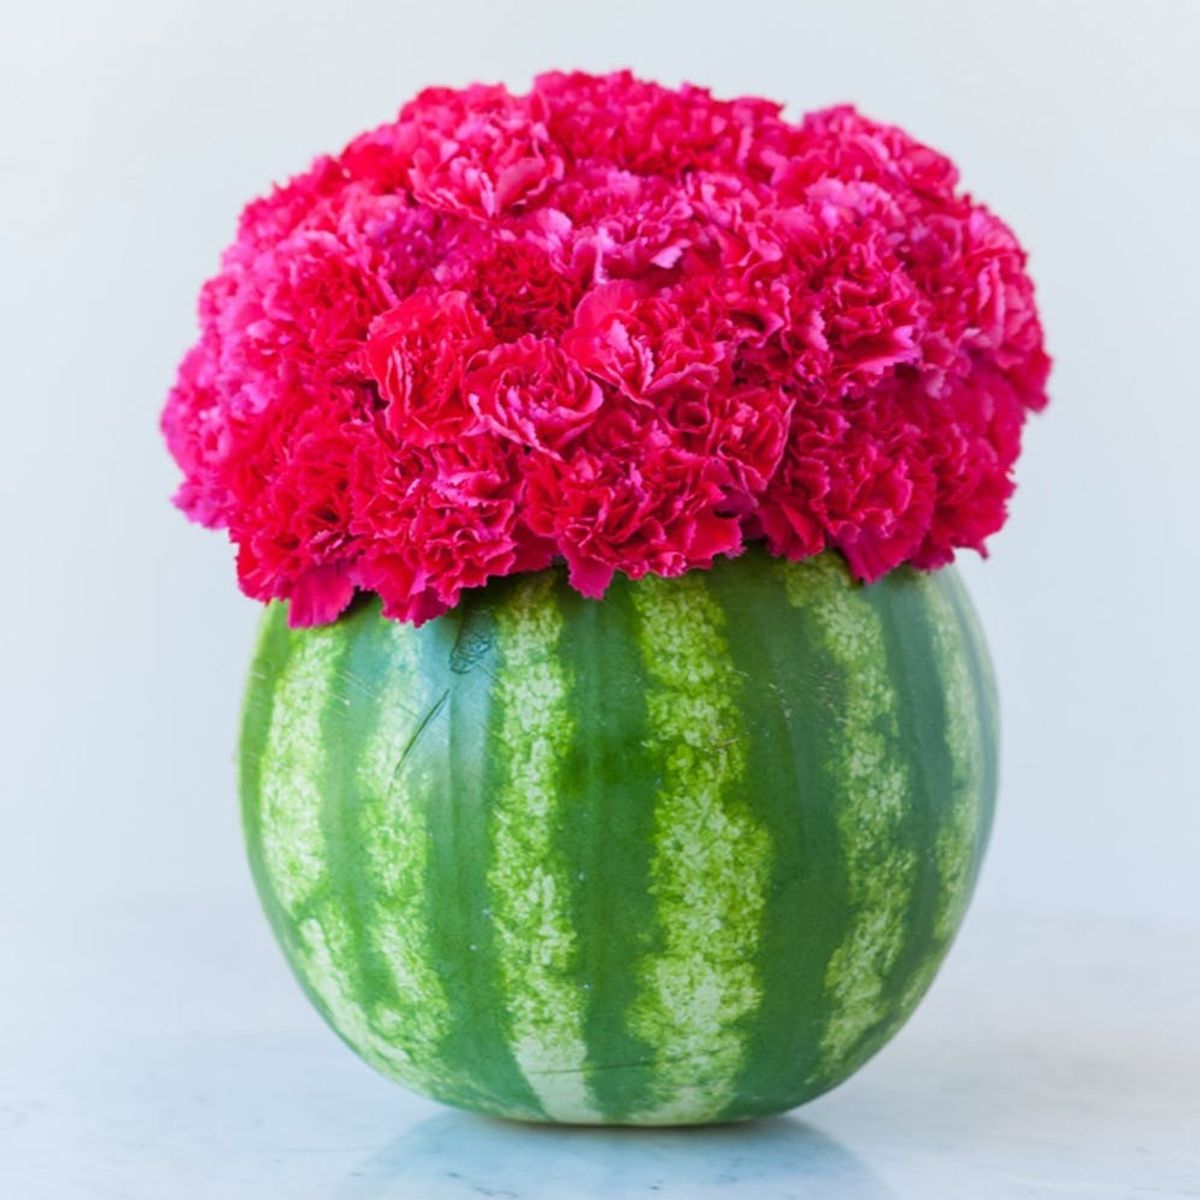 What to Make This Weekend: Slinky Jewelry, a Watermelon Vase + More